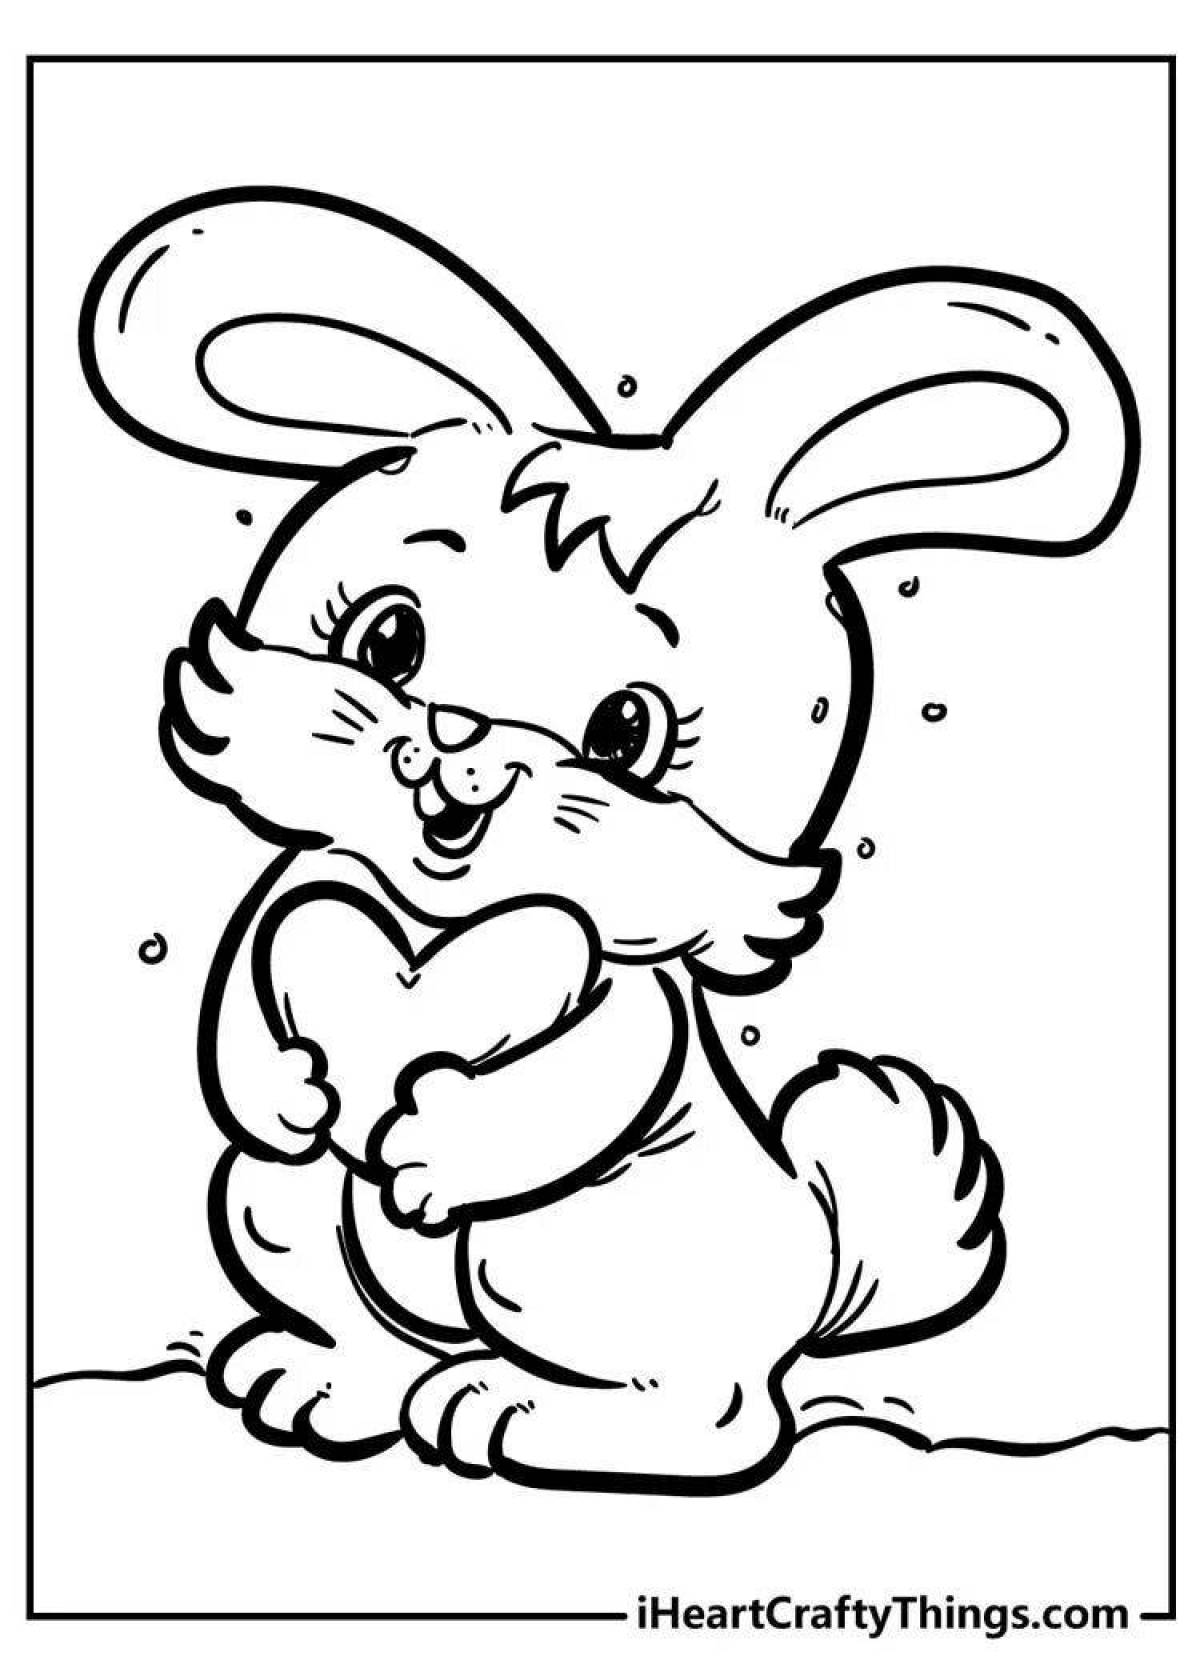 Charming coloring rabbit with a heart